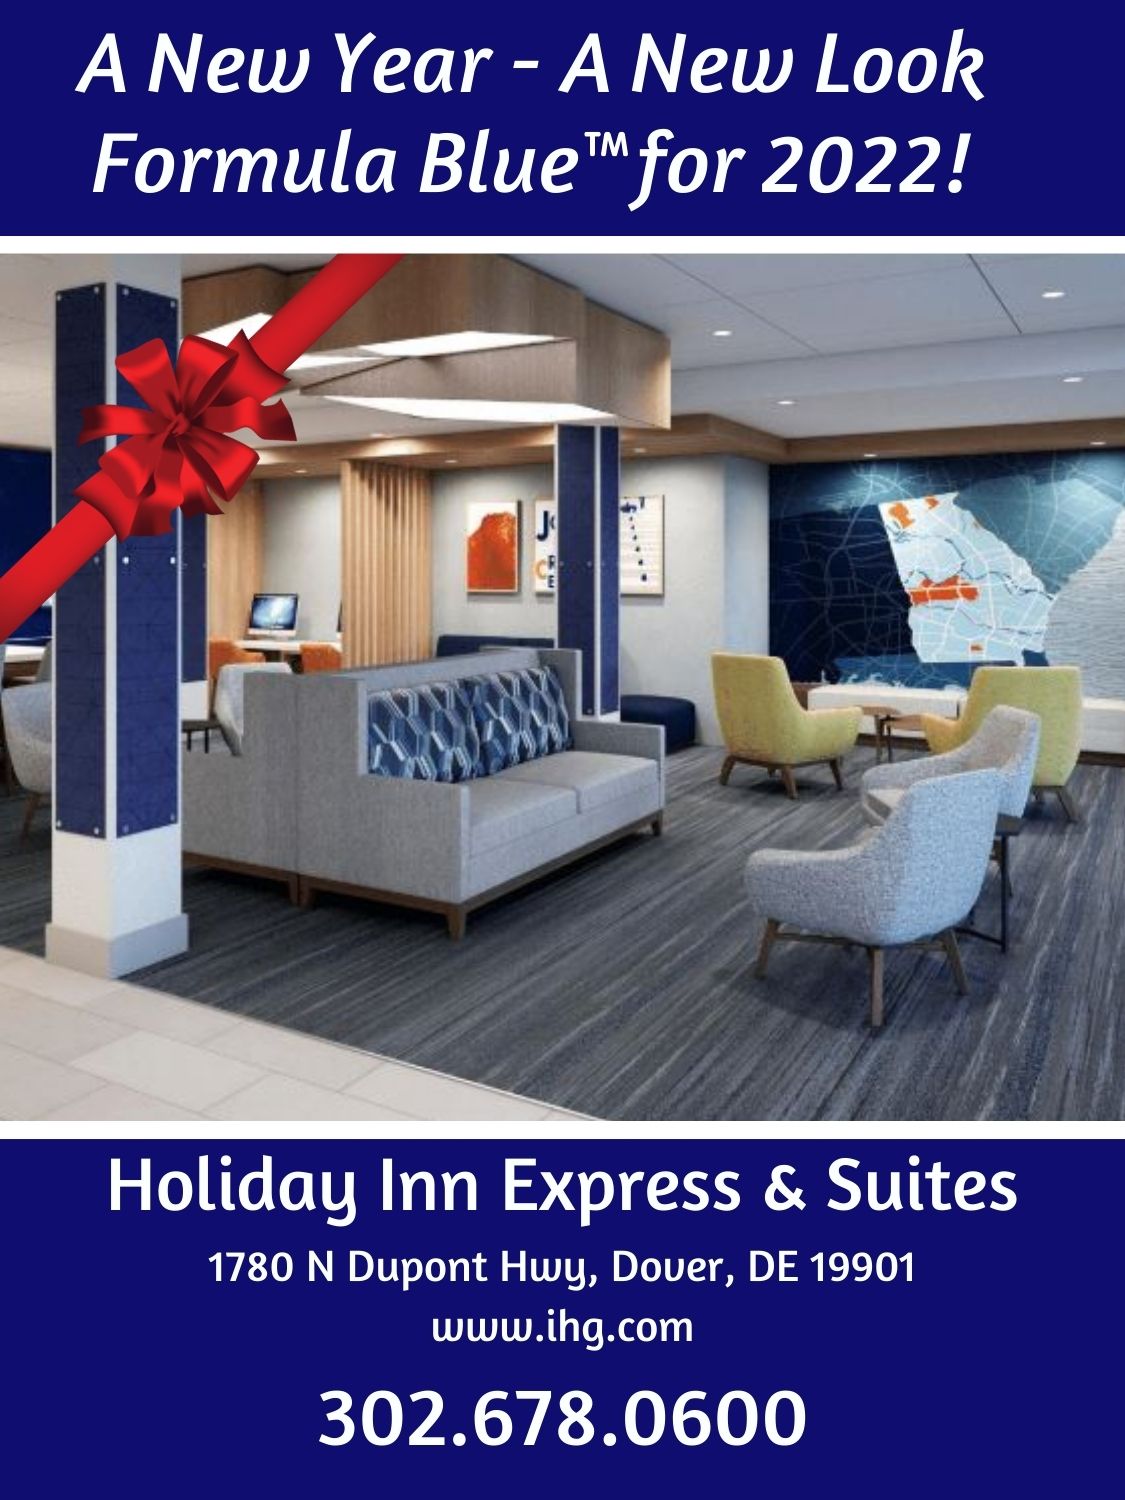 Holiday Inn Express & Suites / Axia Hotel Group